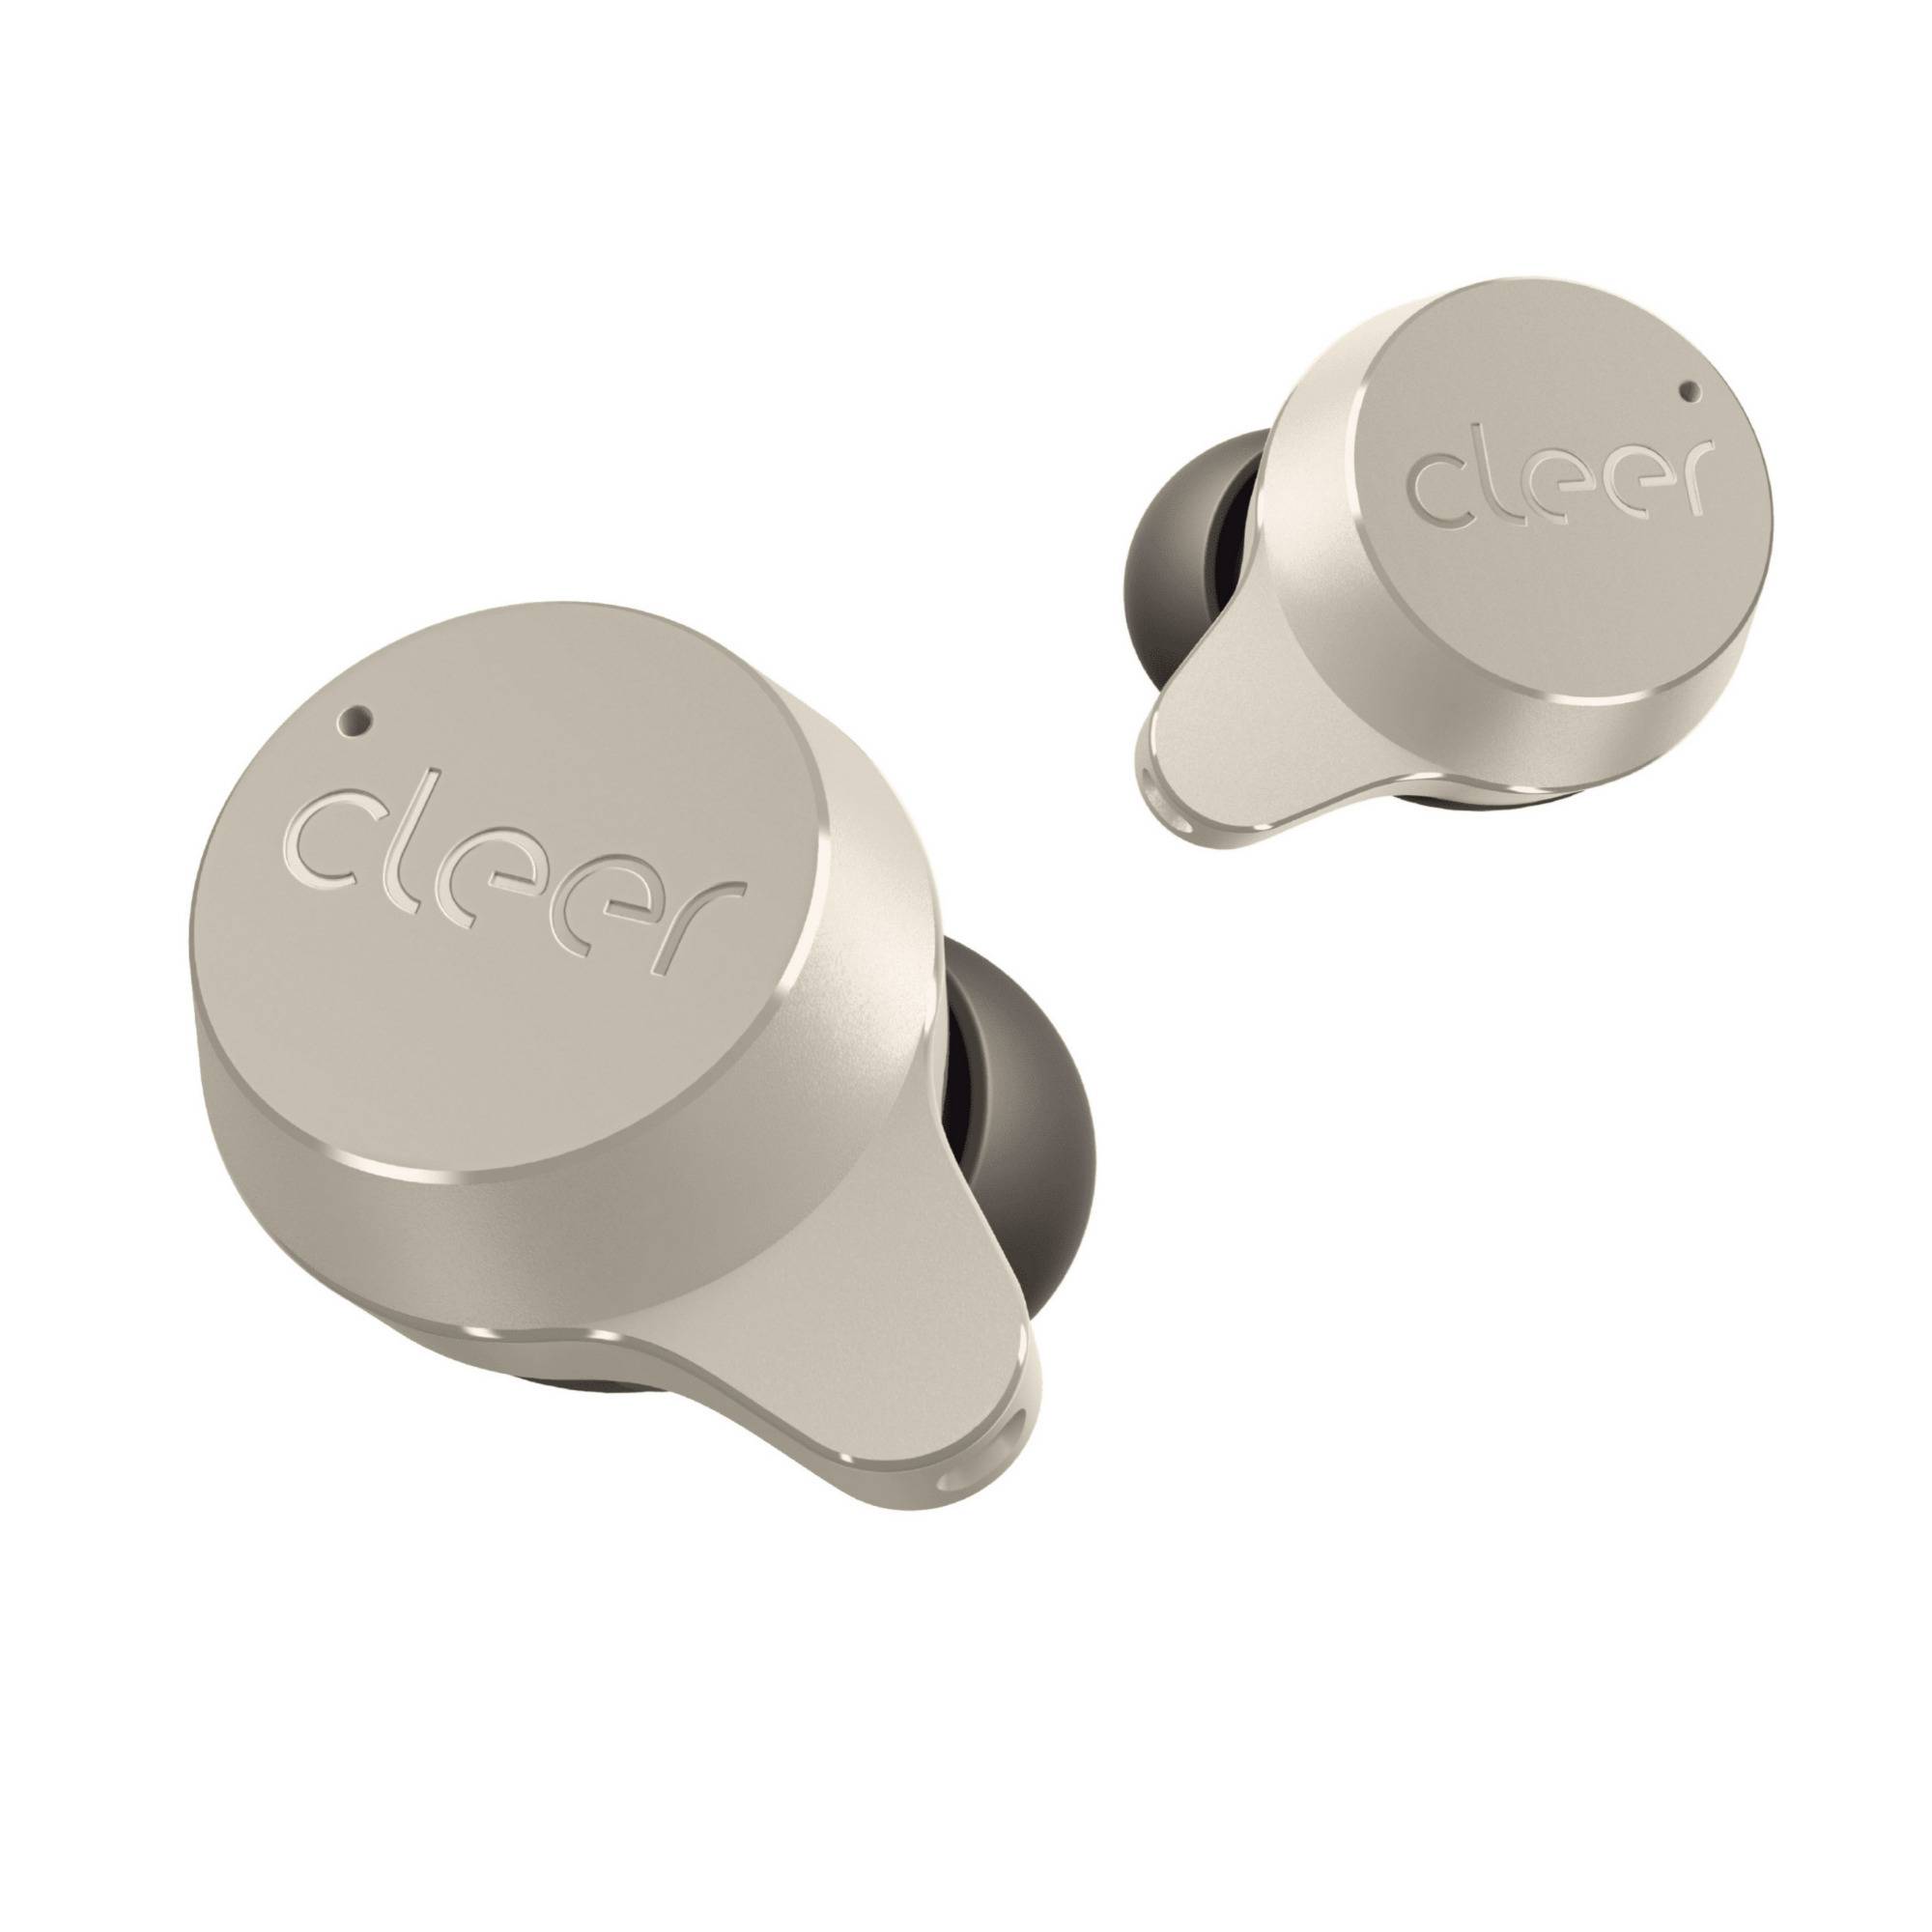 Cleer Audio Roam Noise Cancelling Wireless Earbuds with Touch Controls and Equalizer (Sand)